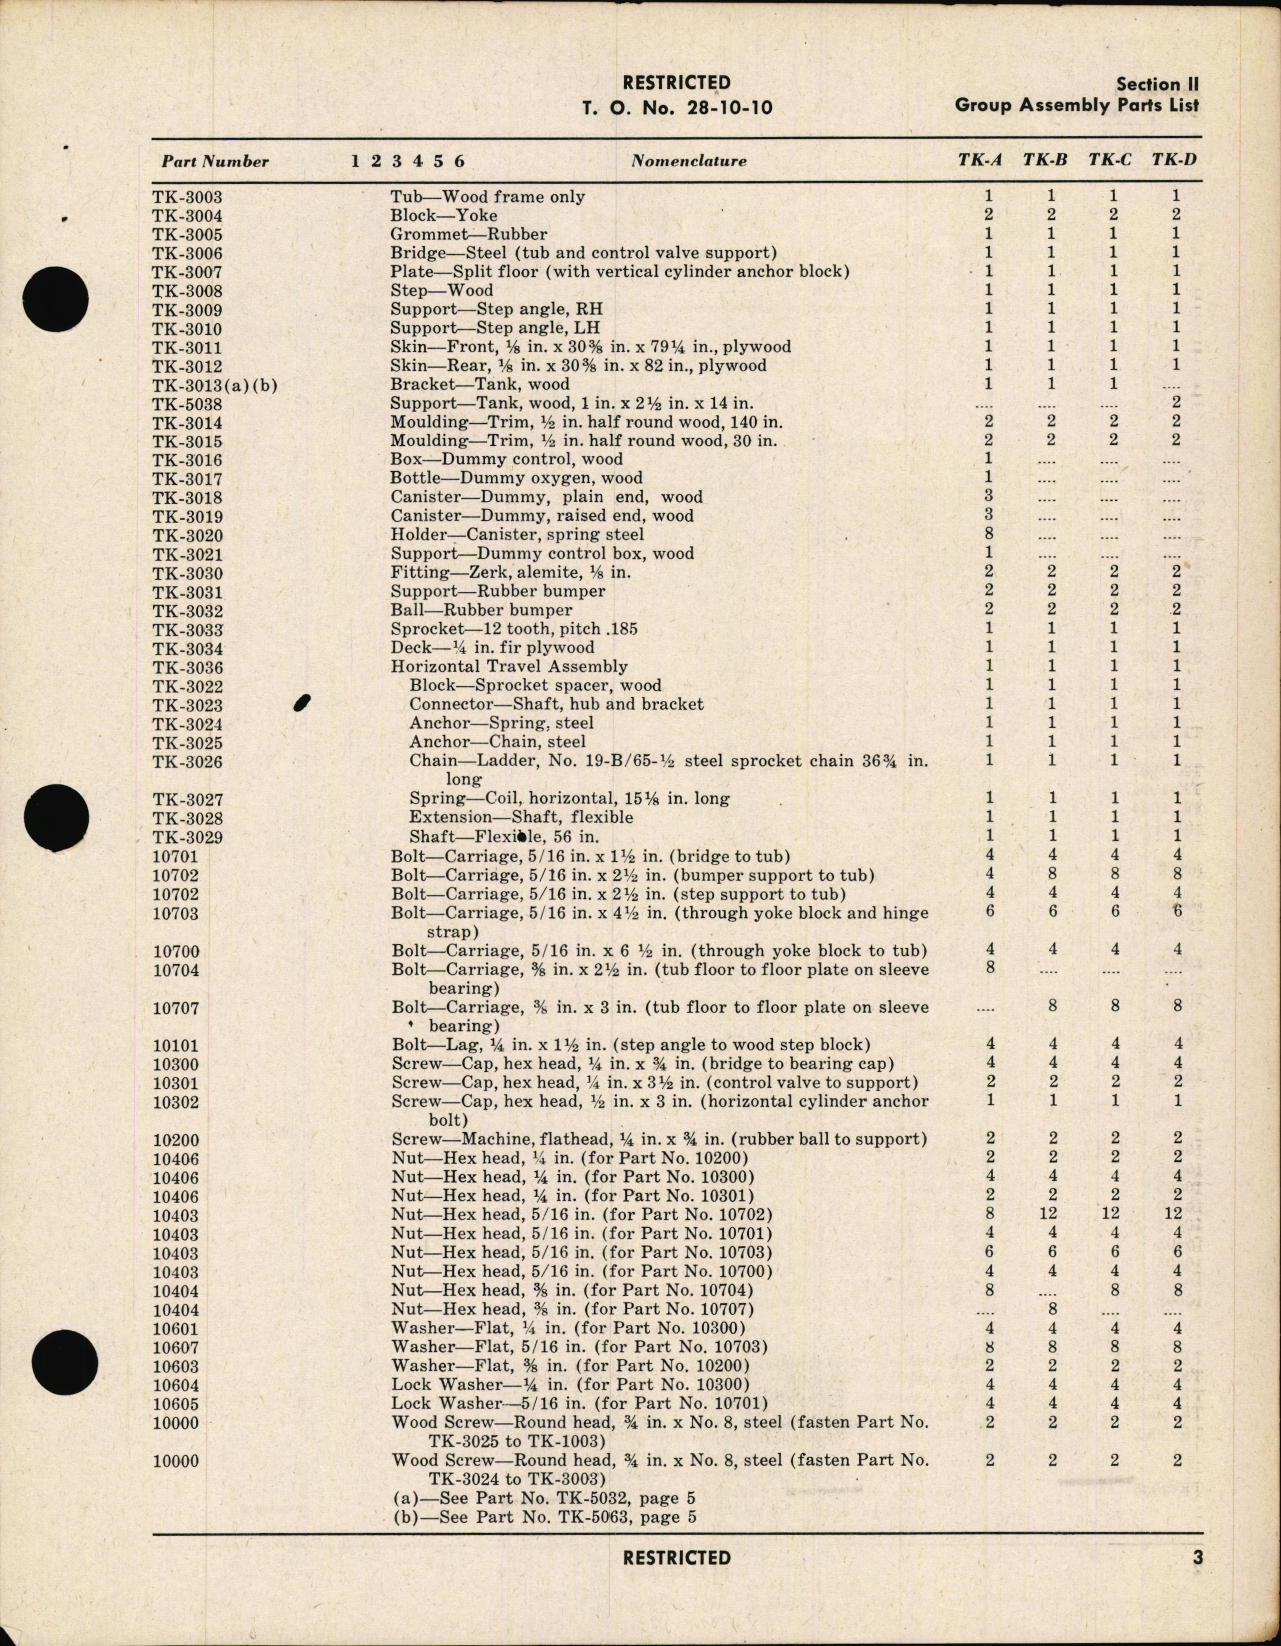 Sample page 5 from AirCorps Library document: Parts Catalog for Basic Training Turrets Mark II